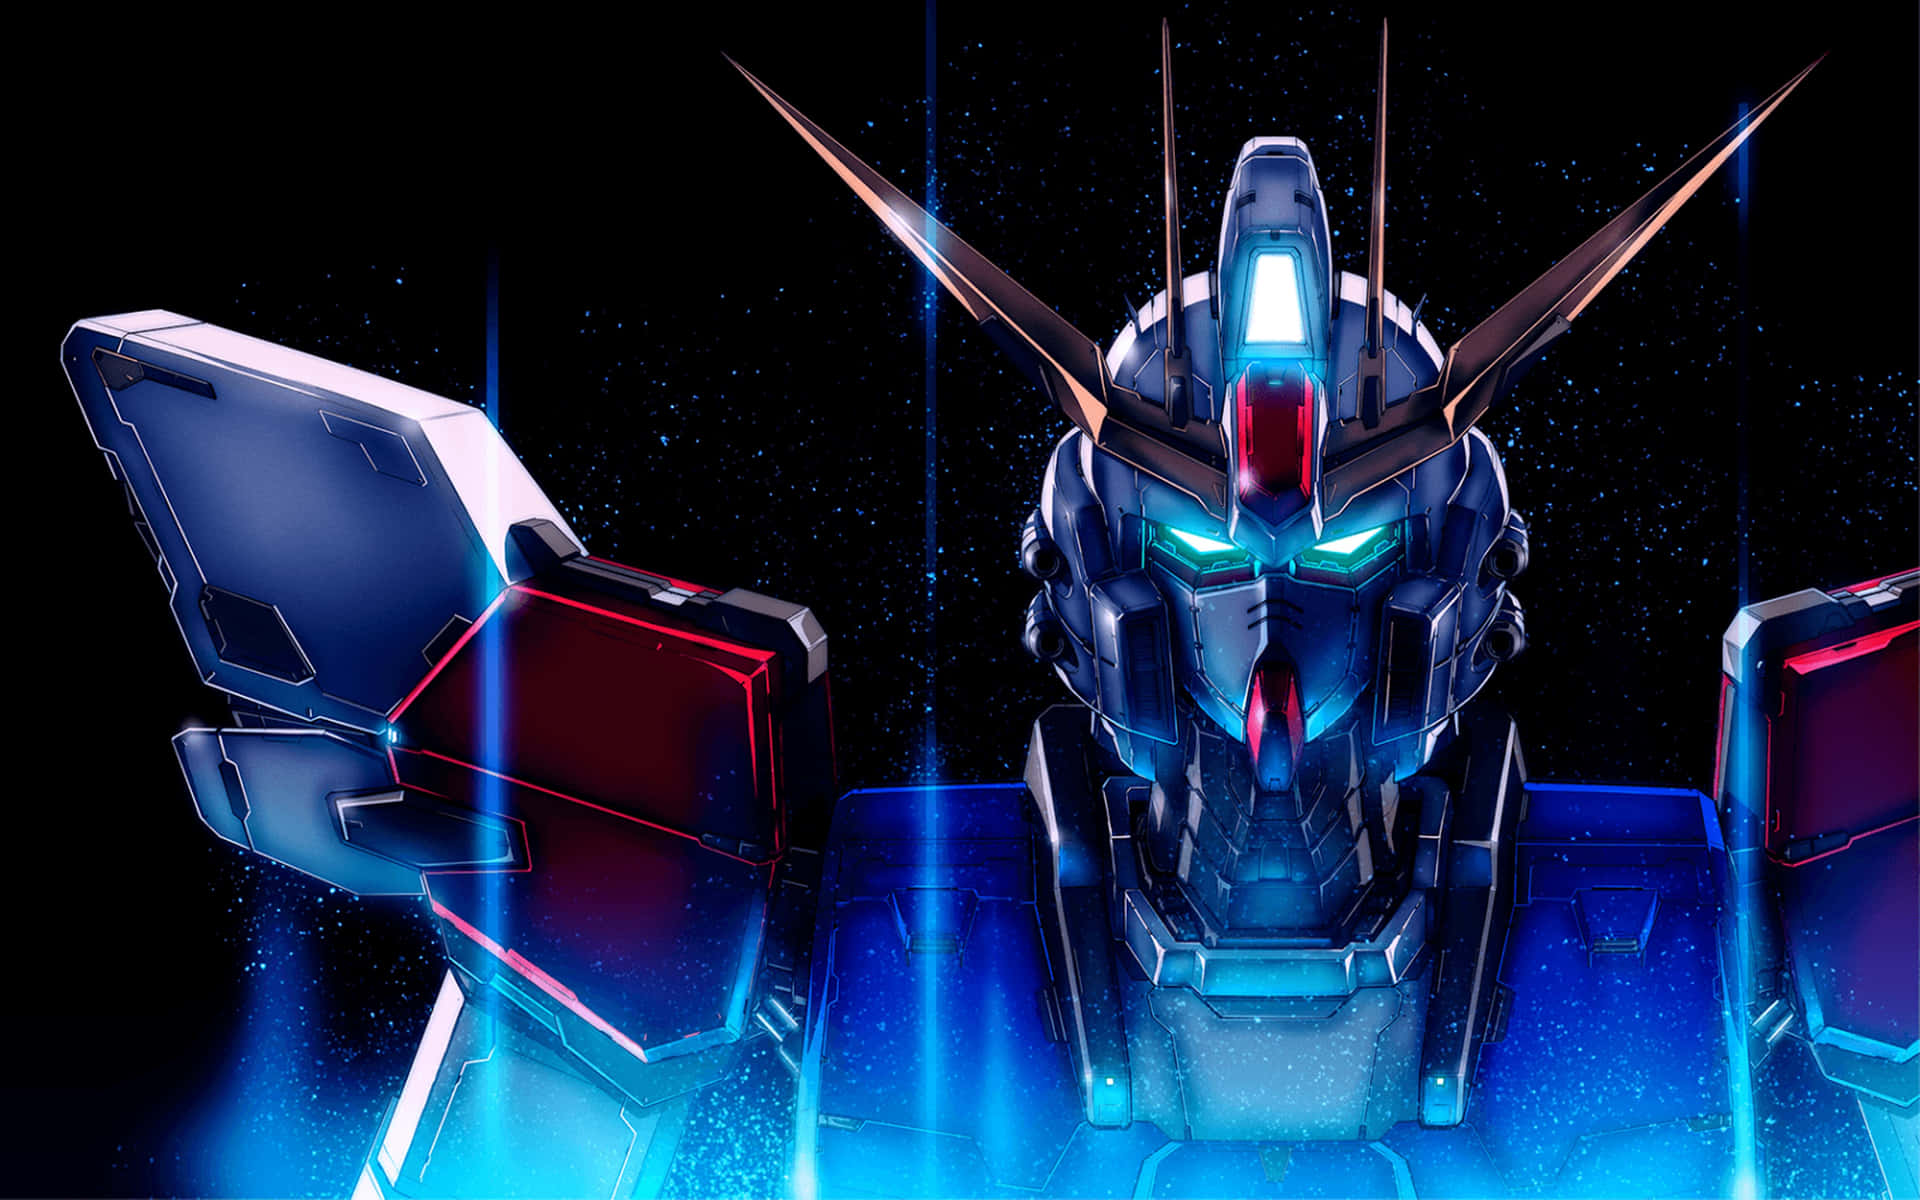 Get ready to take on your enemies in the epic fictional universe of Gundam Wallpaper